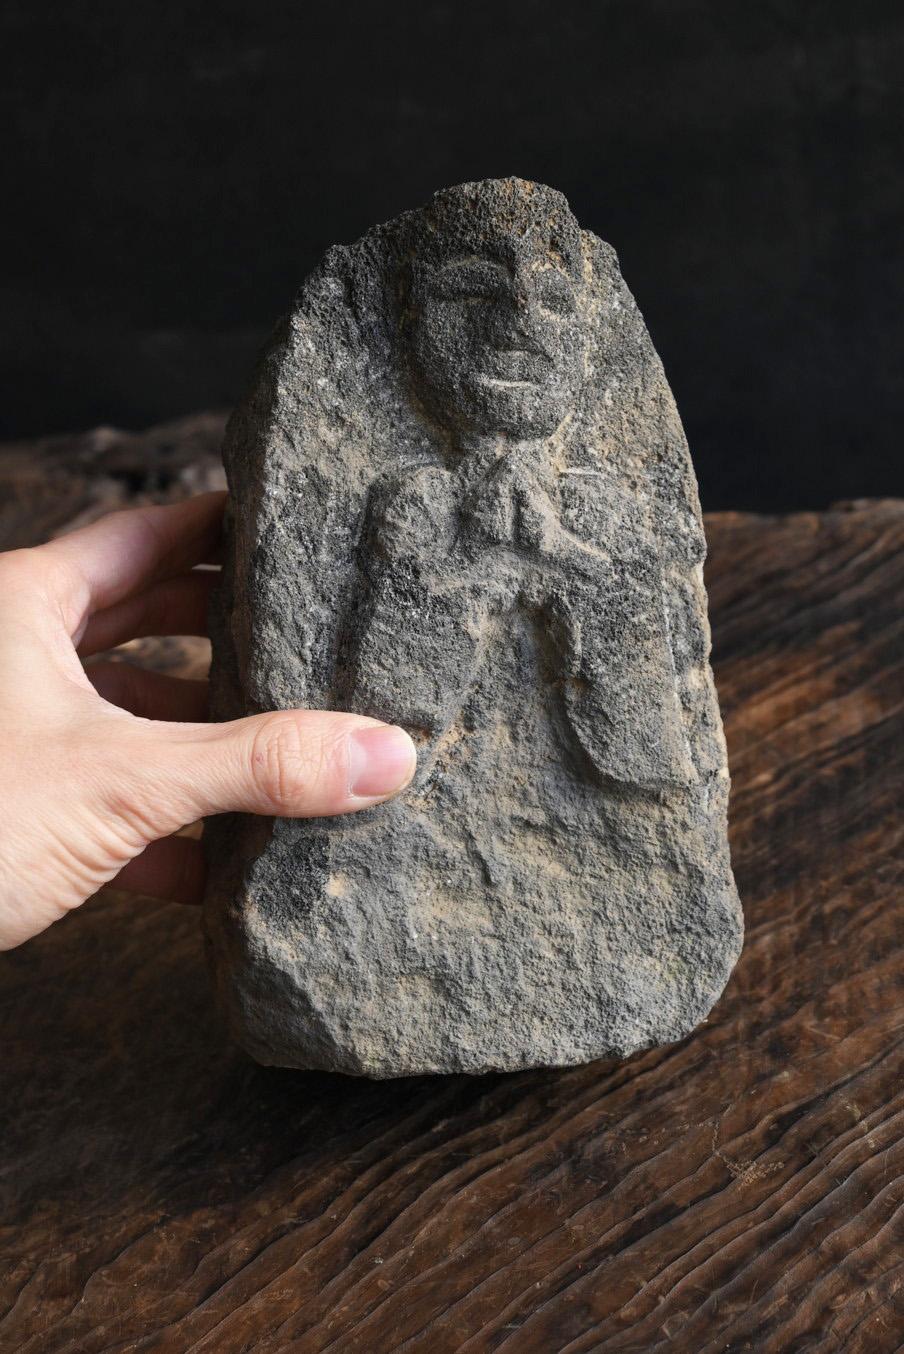 This is a small stone Buddha made after the middle of the Edo period in Japan.
It is a type of Buddha statue called Jizo in Japan, and is one of the bodhisattvas in the world of Buddhism.
It is a being who saves people in the world with an